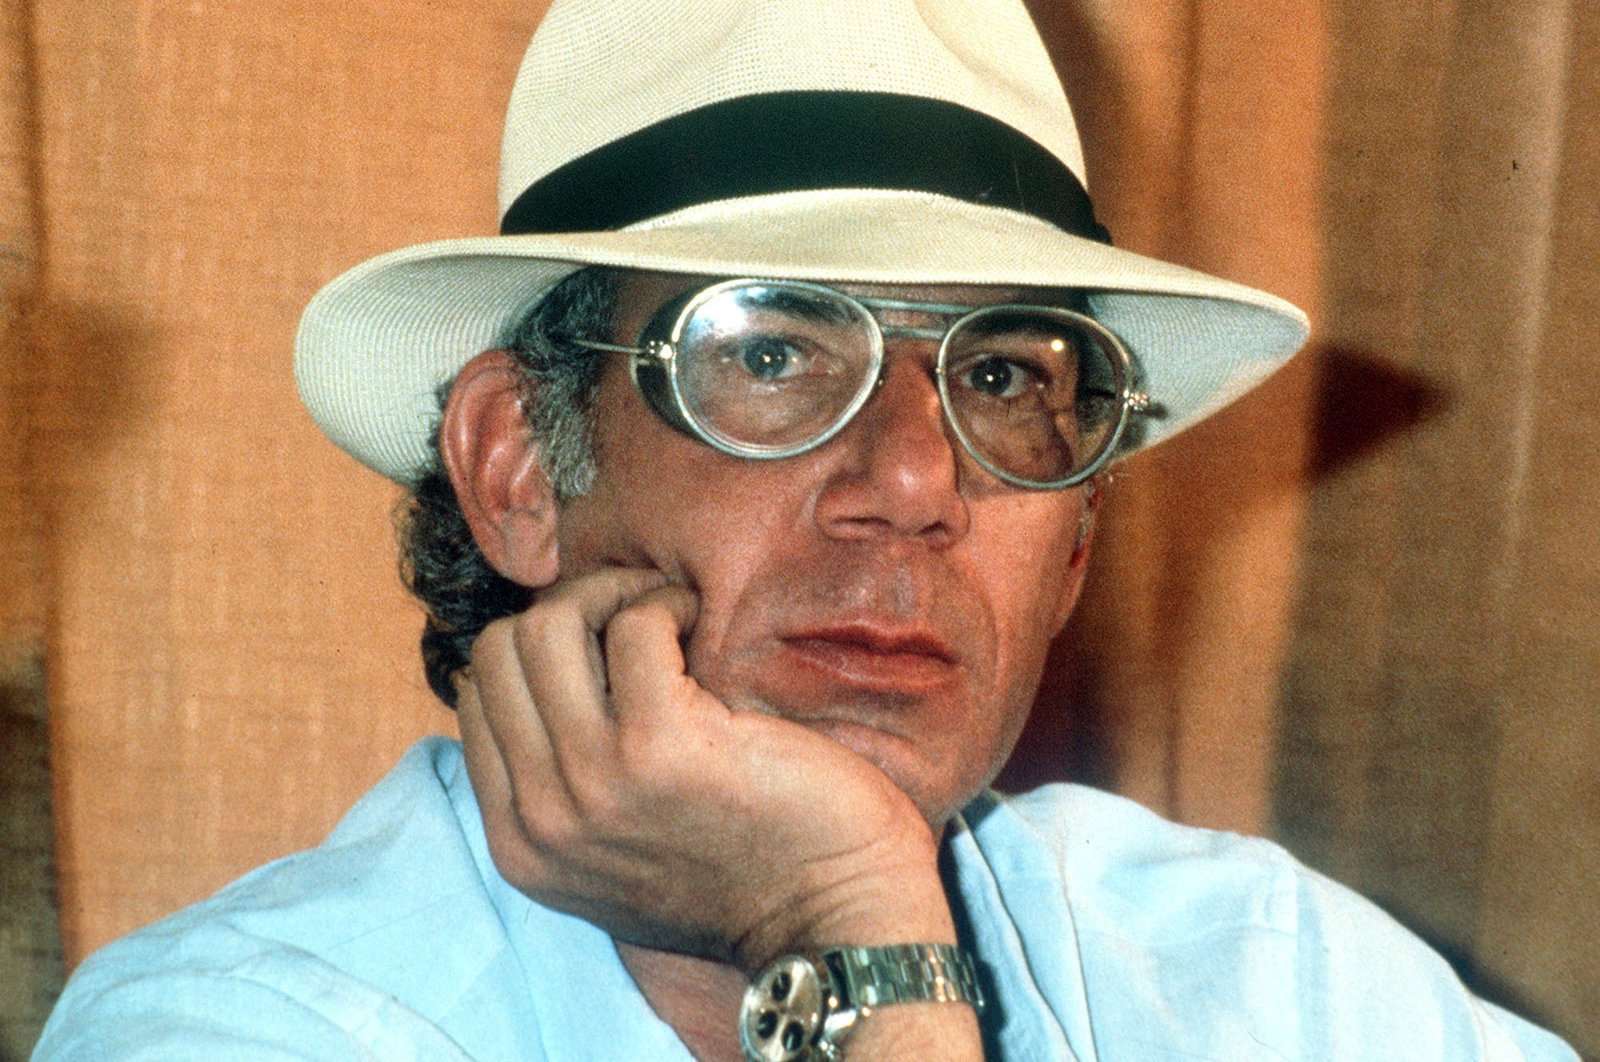 American film director, writer and producer Bob Rafelson is seen in this 1981 photo. (AP File Photo)